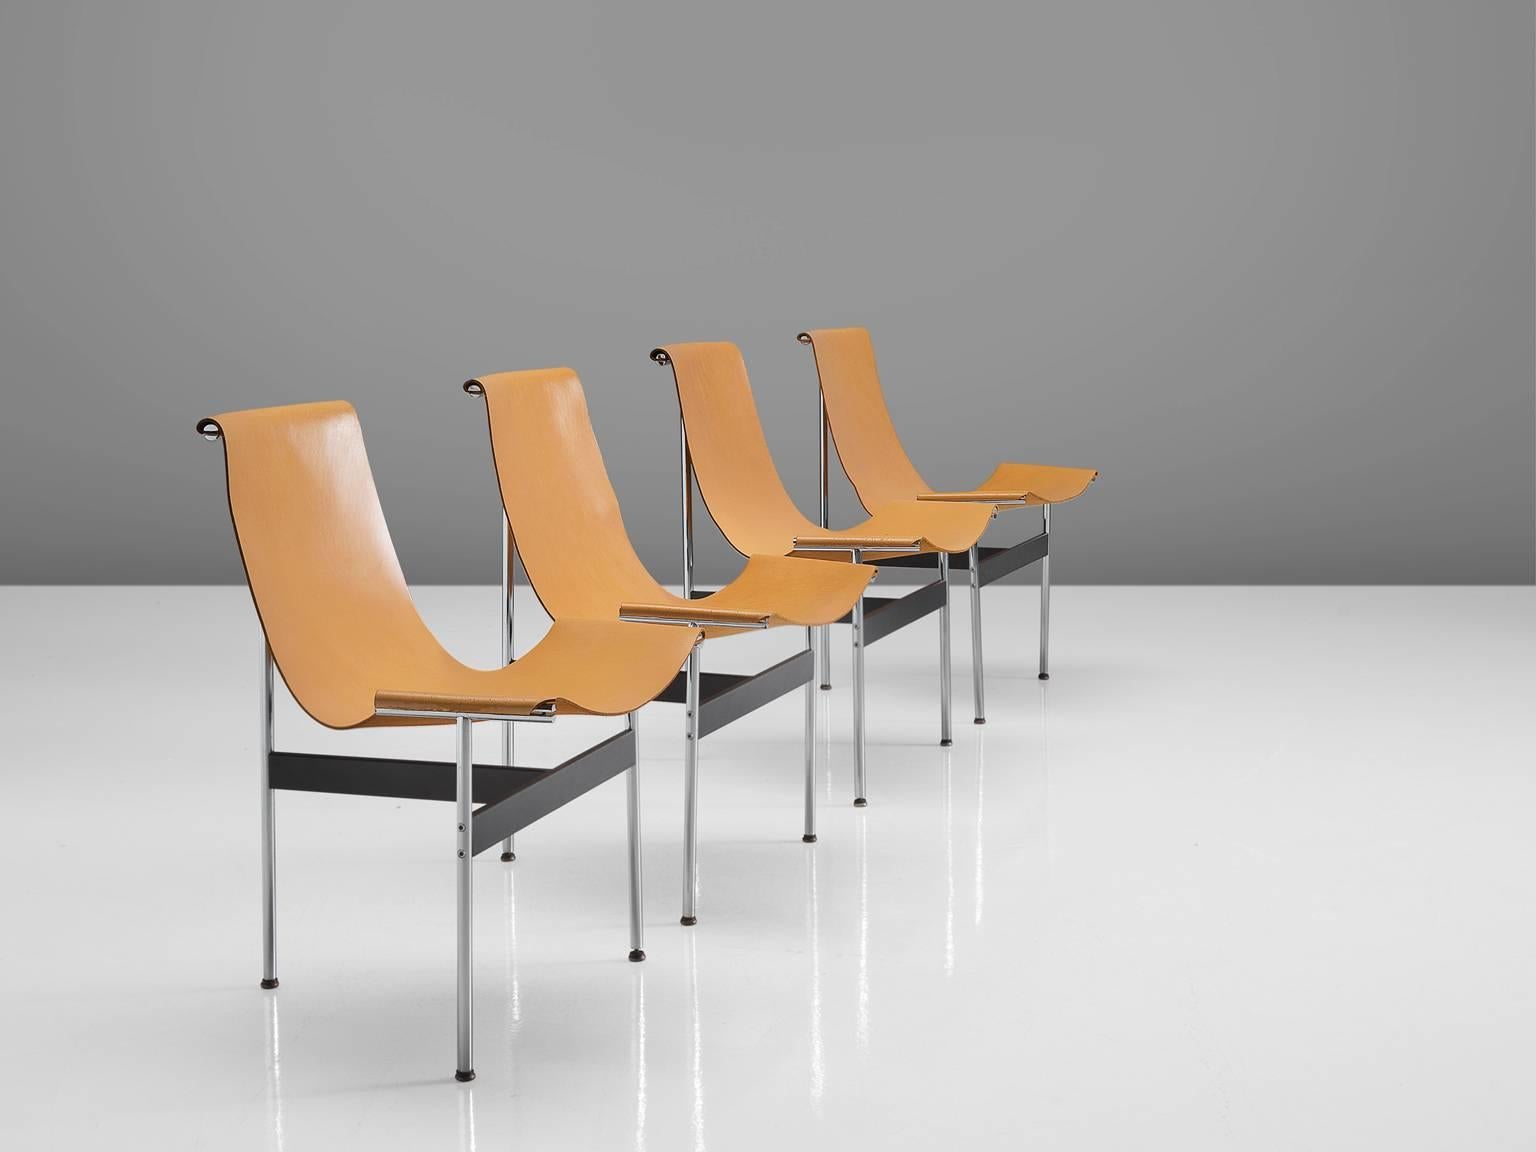 Katavolos, Kelley and Littell, chair, chrome-plated steel, enameled steel and cognac leather, United States, 1952.

This set of elegant and playful three-legged chairs seems almost too delicate to sit in. But in fact these sensuous chairs are very